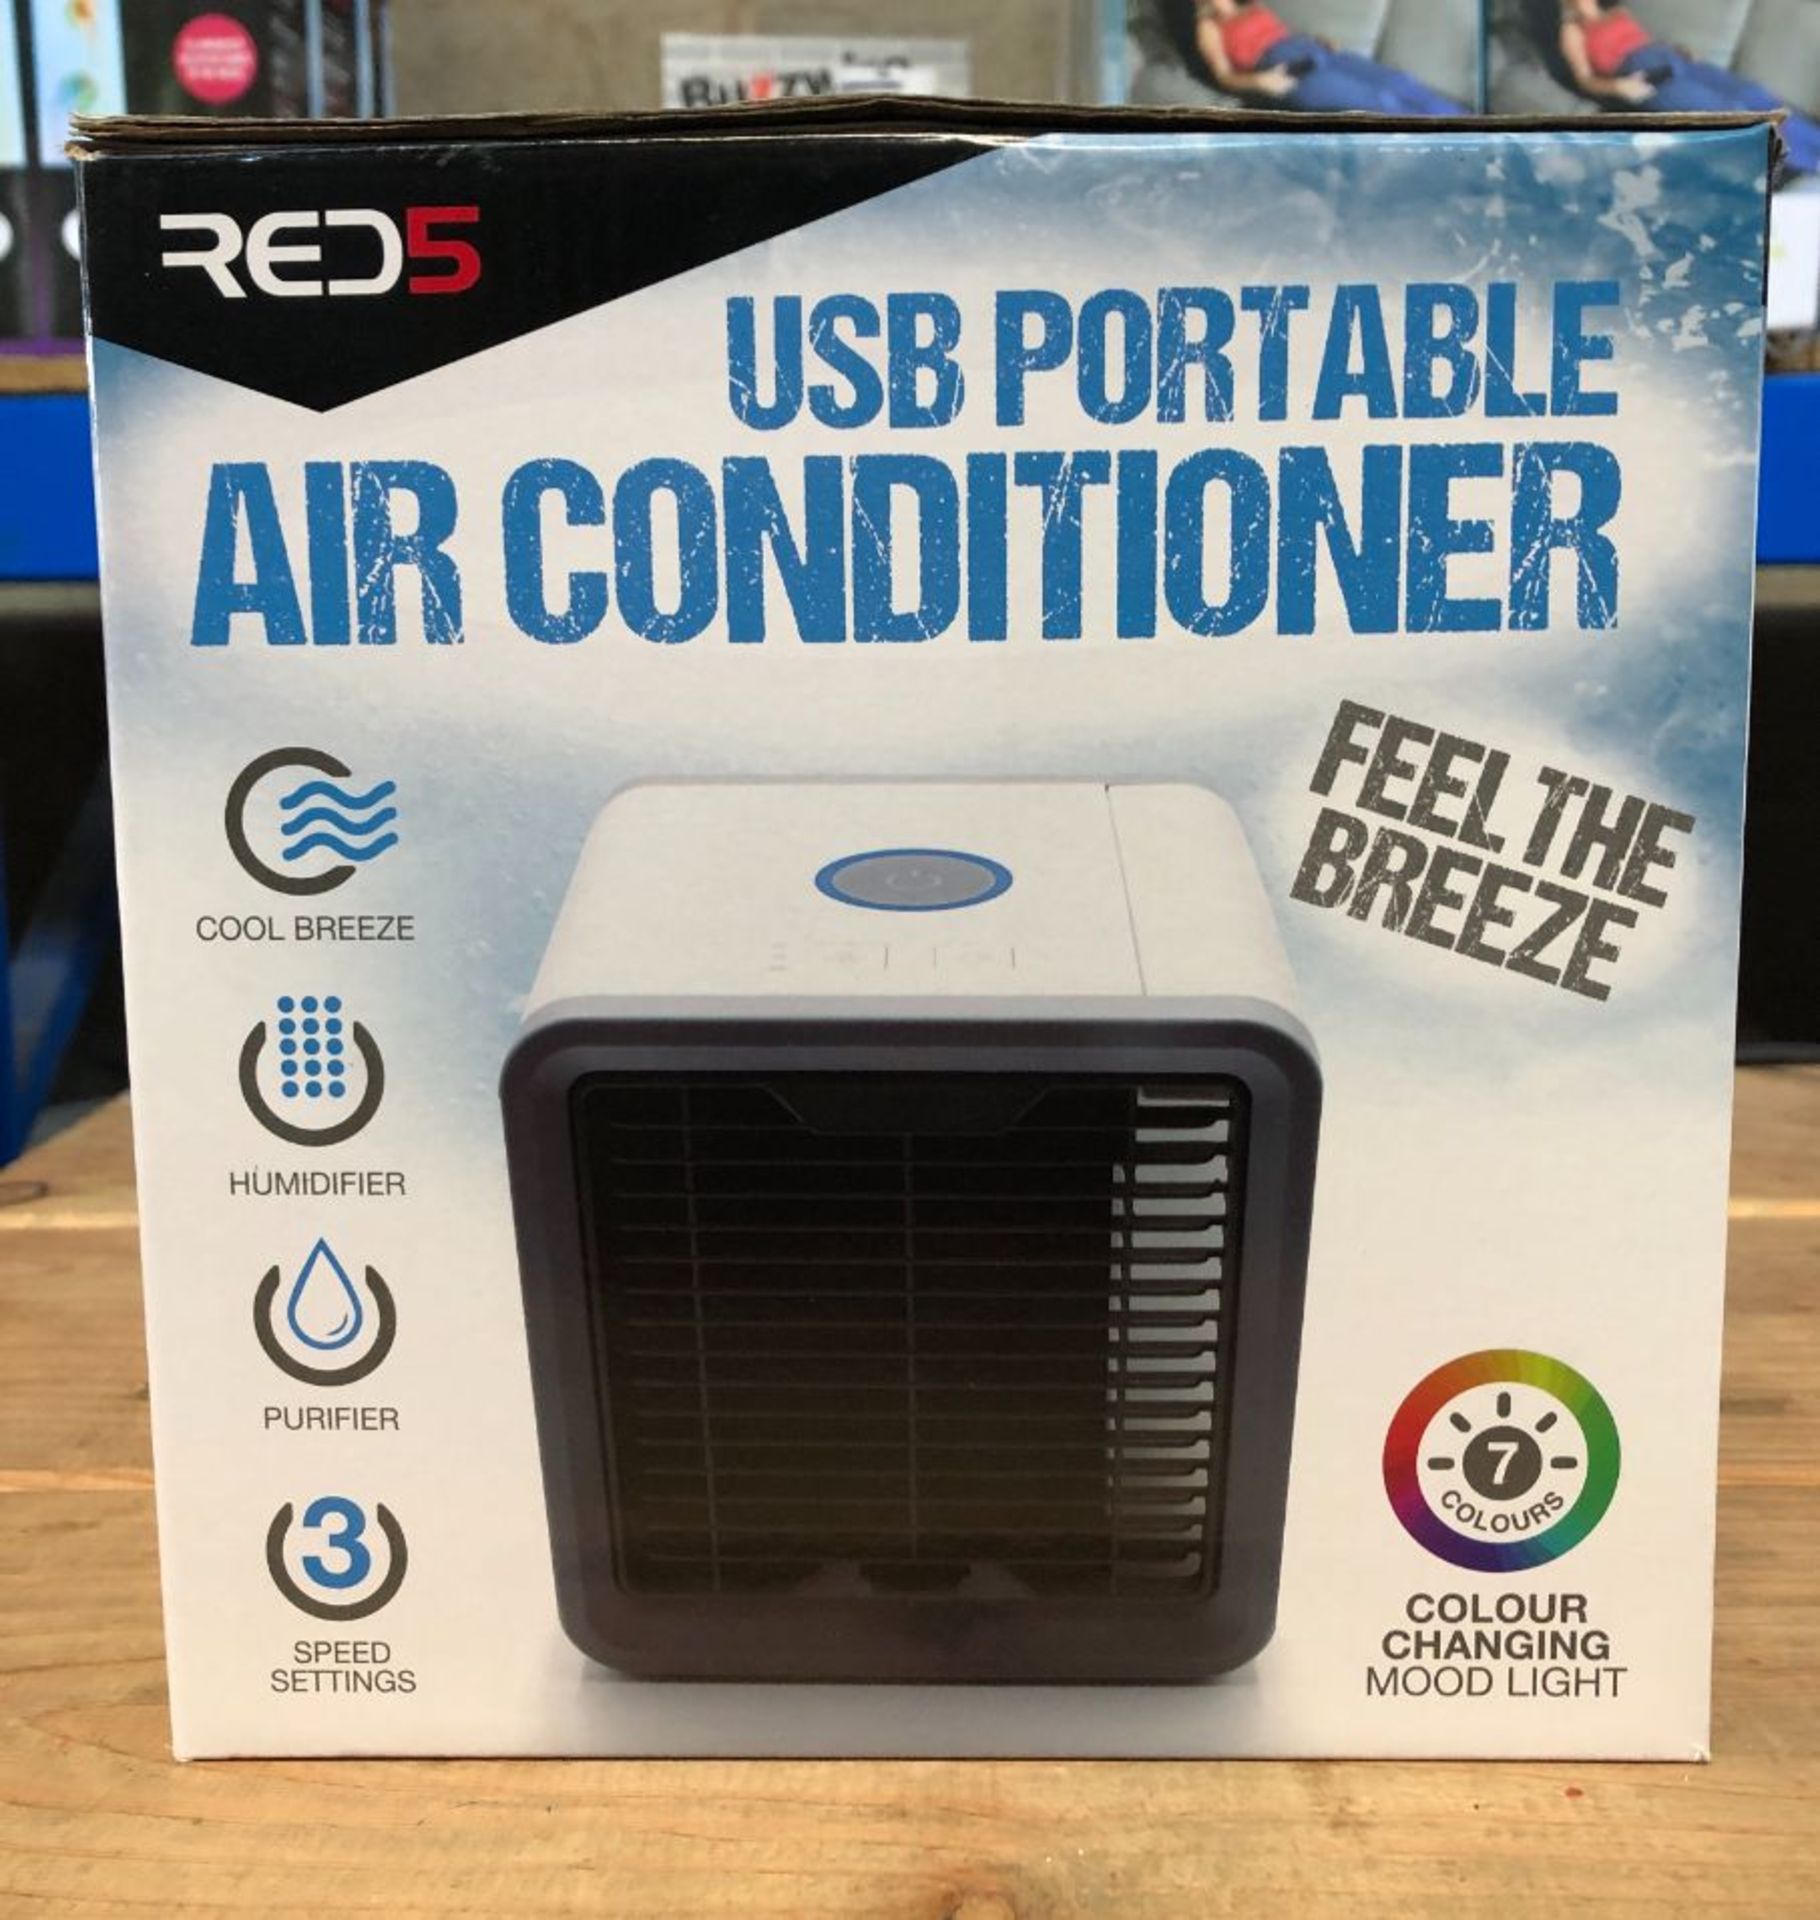 1 X USB PORTABLE AIR CONDITIONER / RRP £20.00 / UNTESTED CUSTOMER RETURN